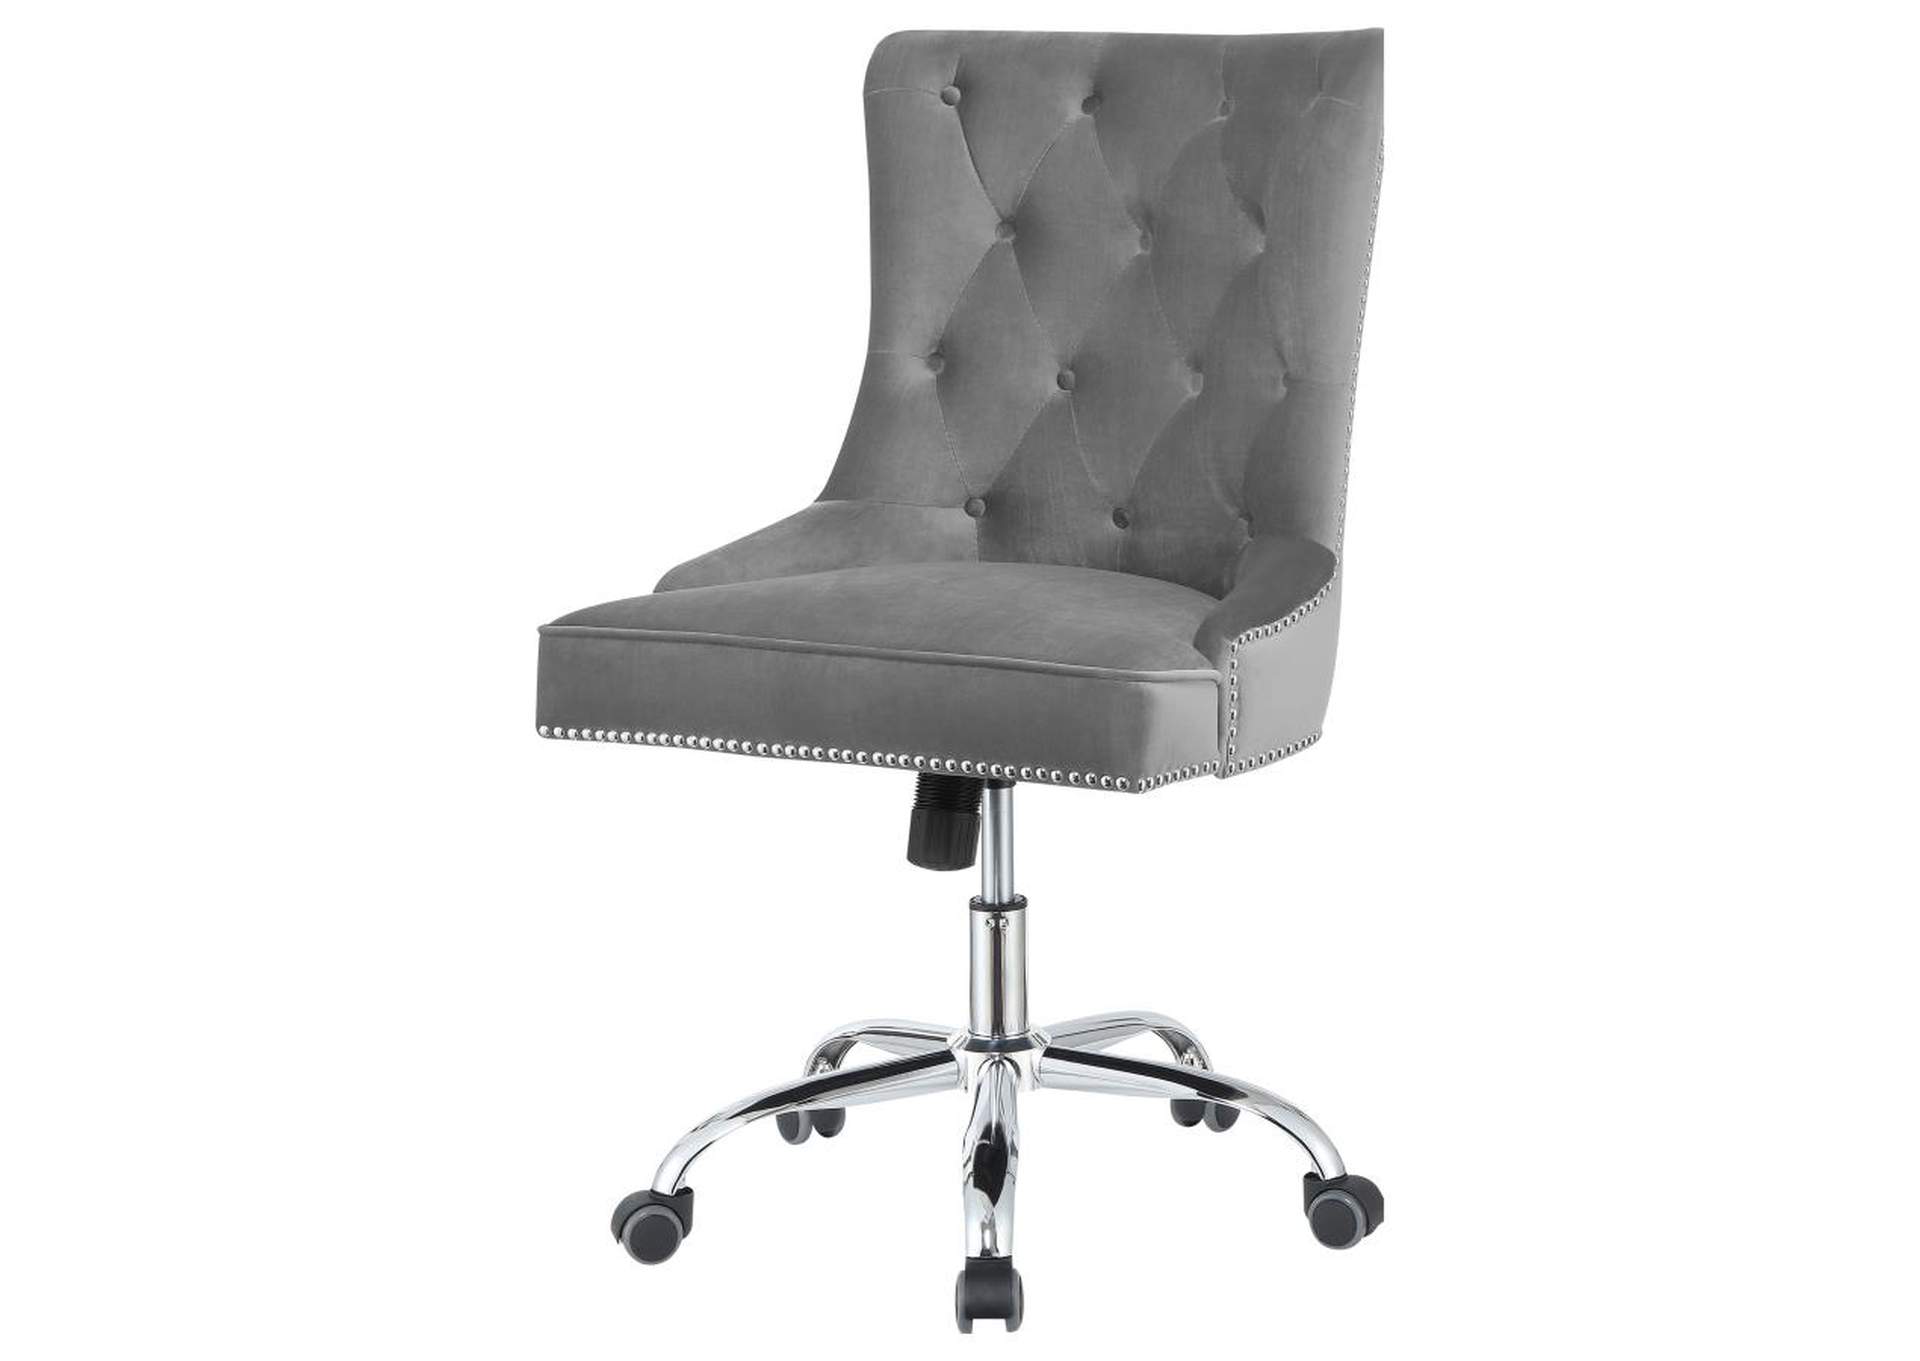 Torrance Tufted Back Office Chair Grey and Chrome,Coaster Furniture